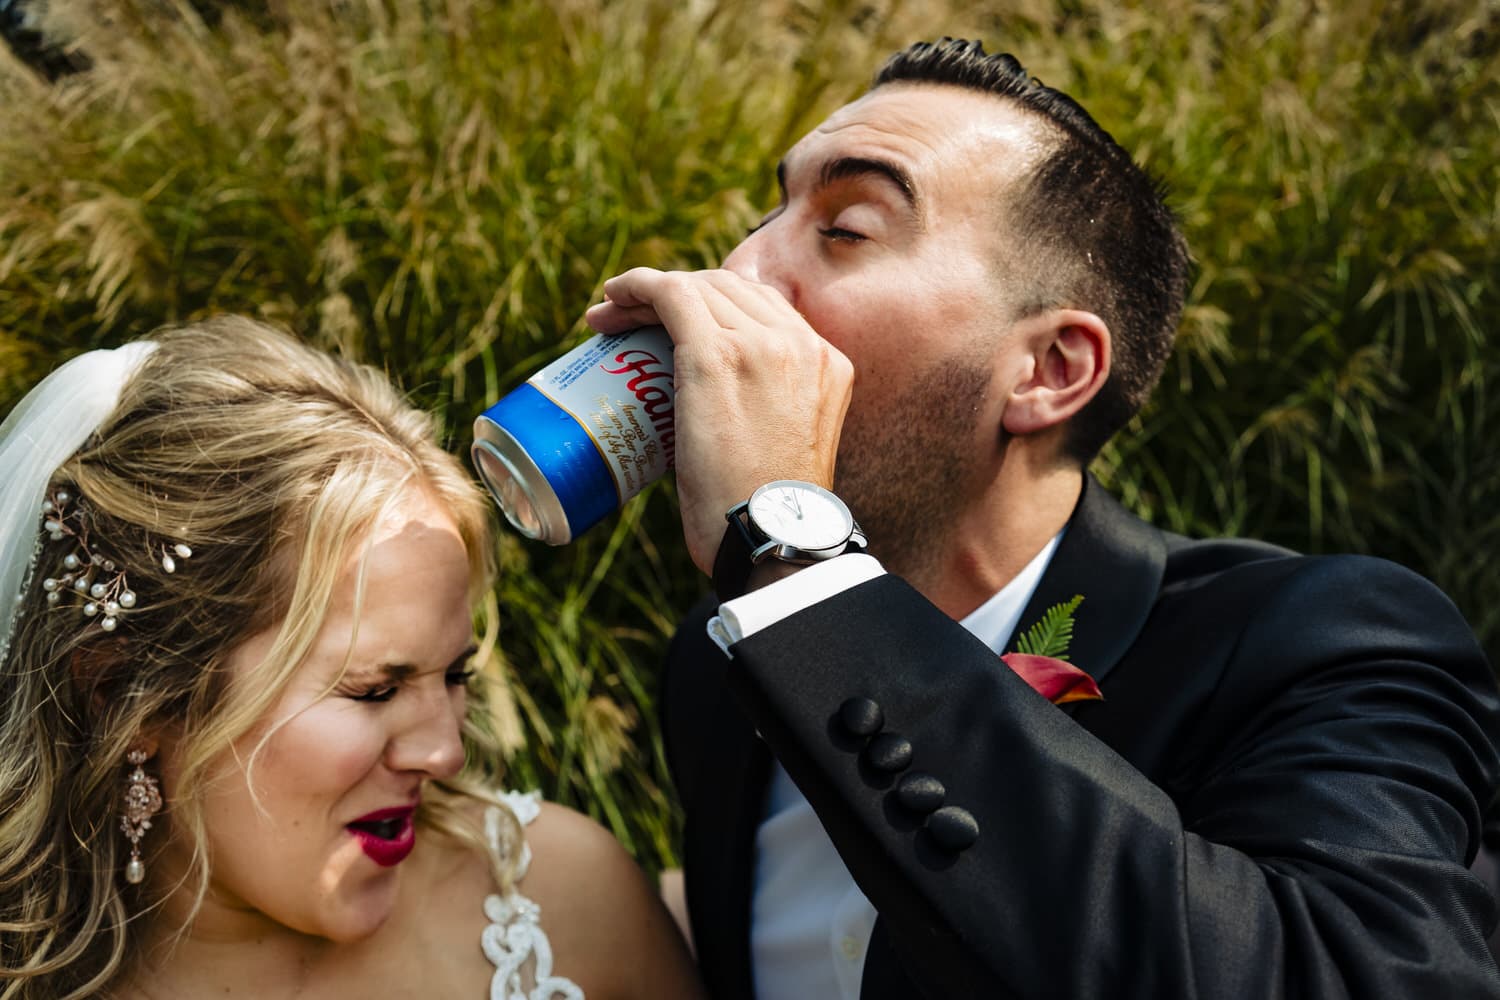 A colorful, candid picture of a man drinking from a Hamm's beer can as a bride grimmaces nearby on a fall wedding day. 